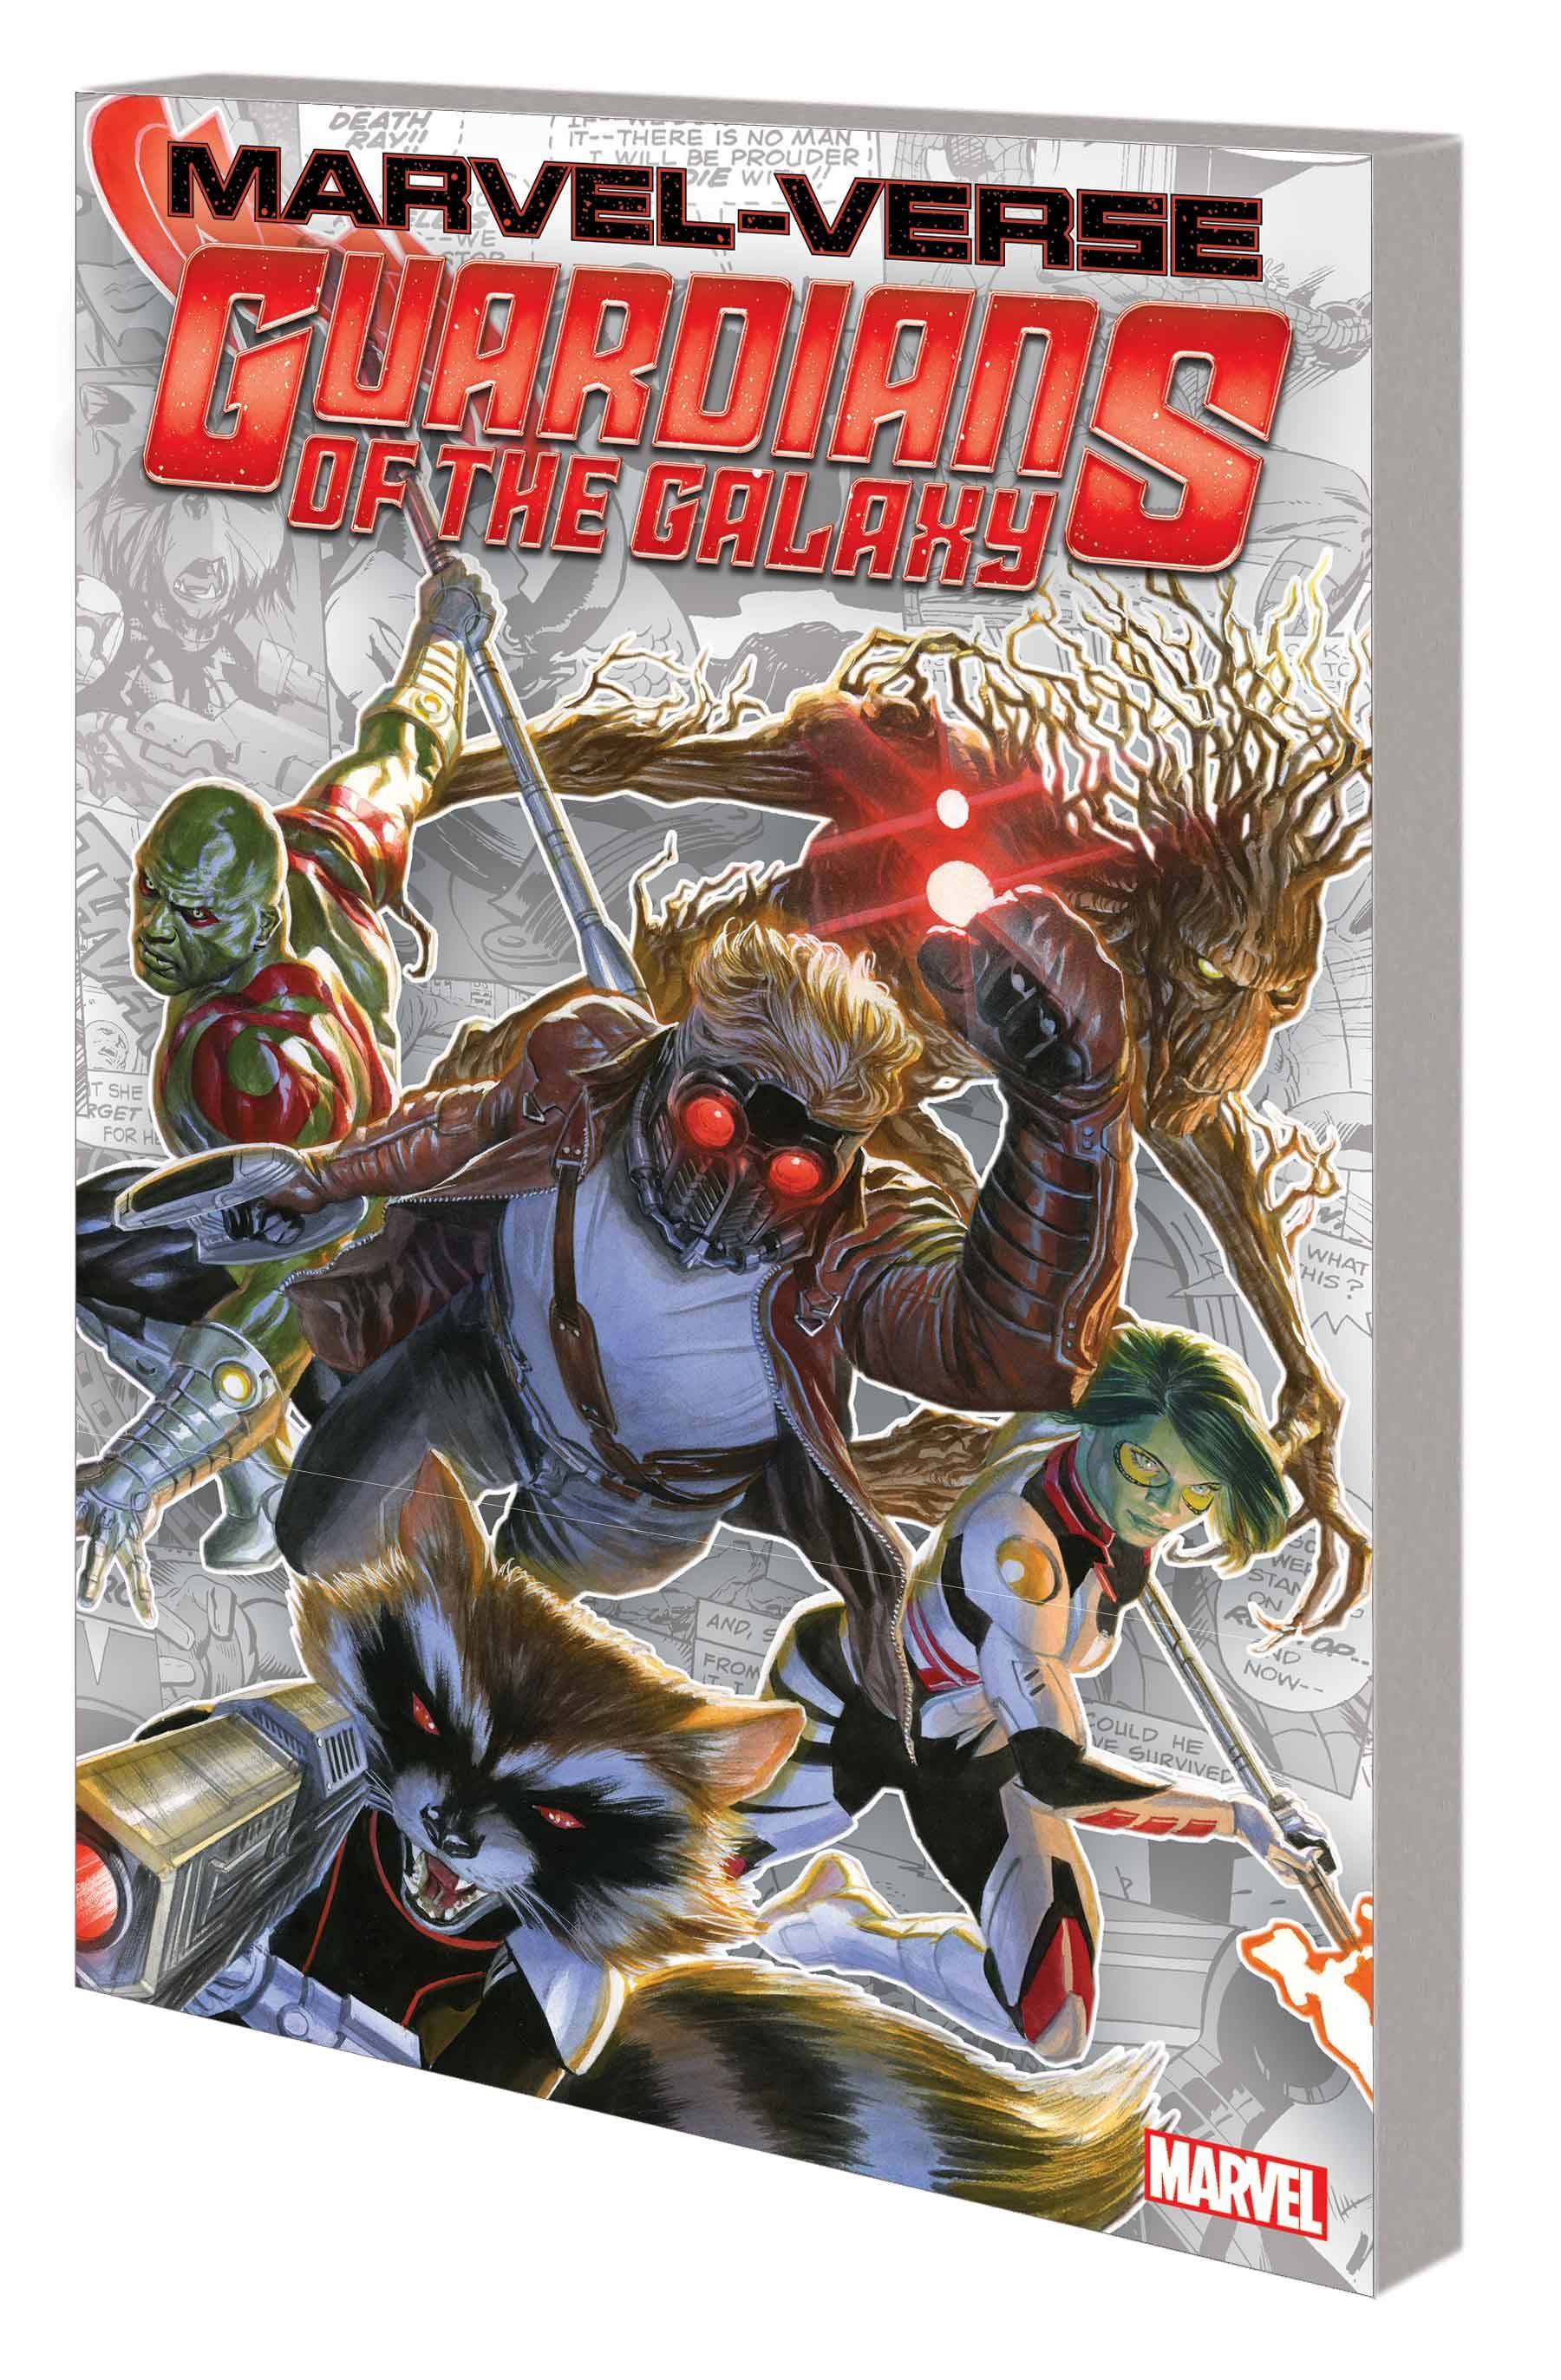 MARVEL-VERSE GN TP GUARDIANS OF THE GALAXY